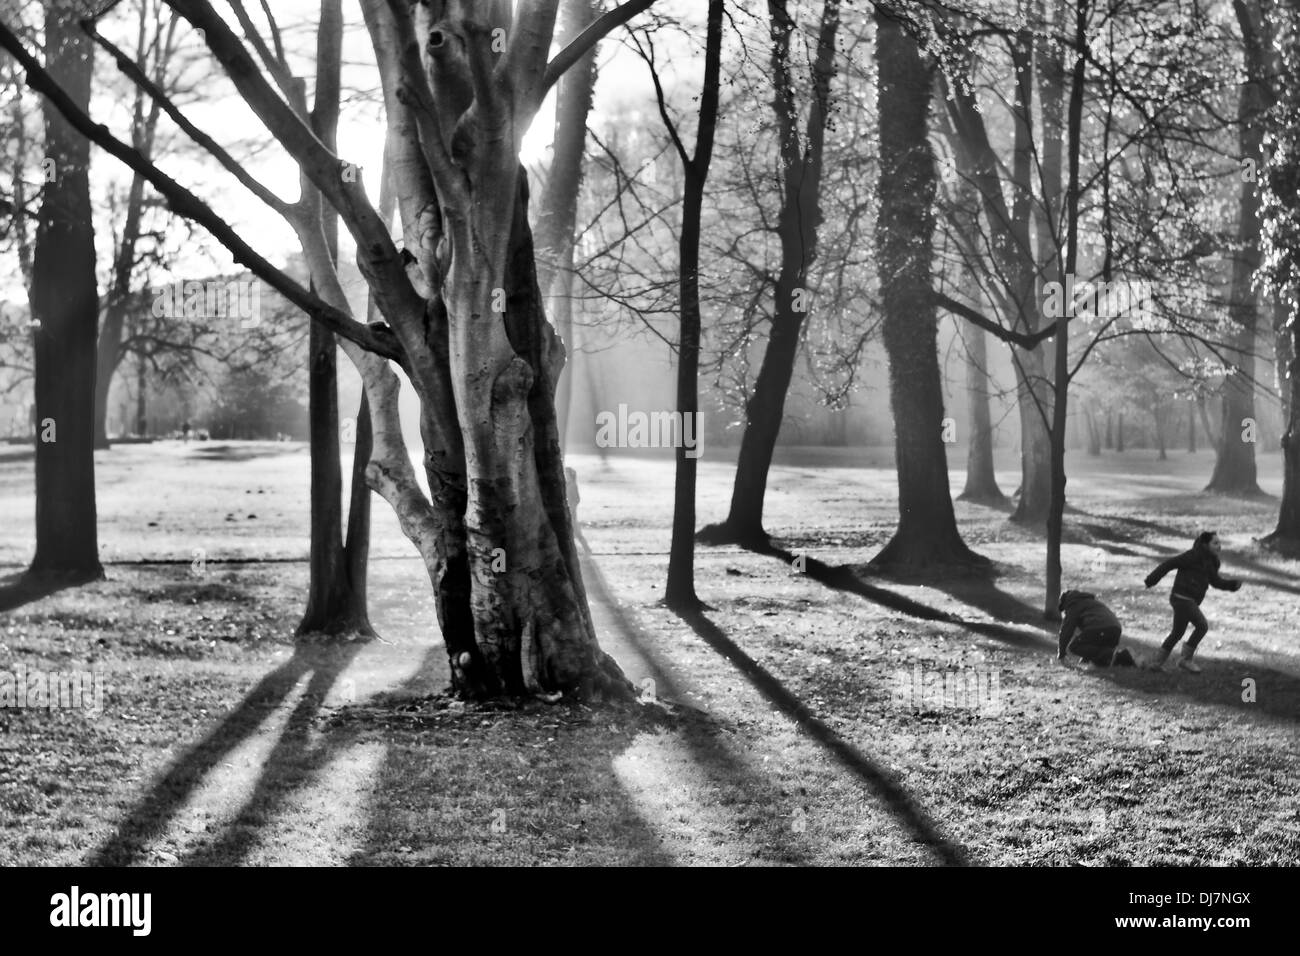 Trees and shadows in park Stock Photo